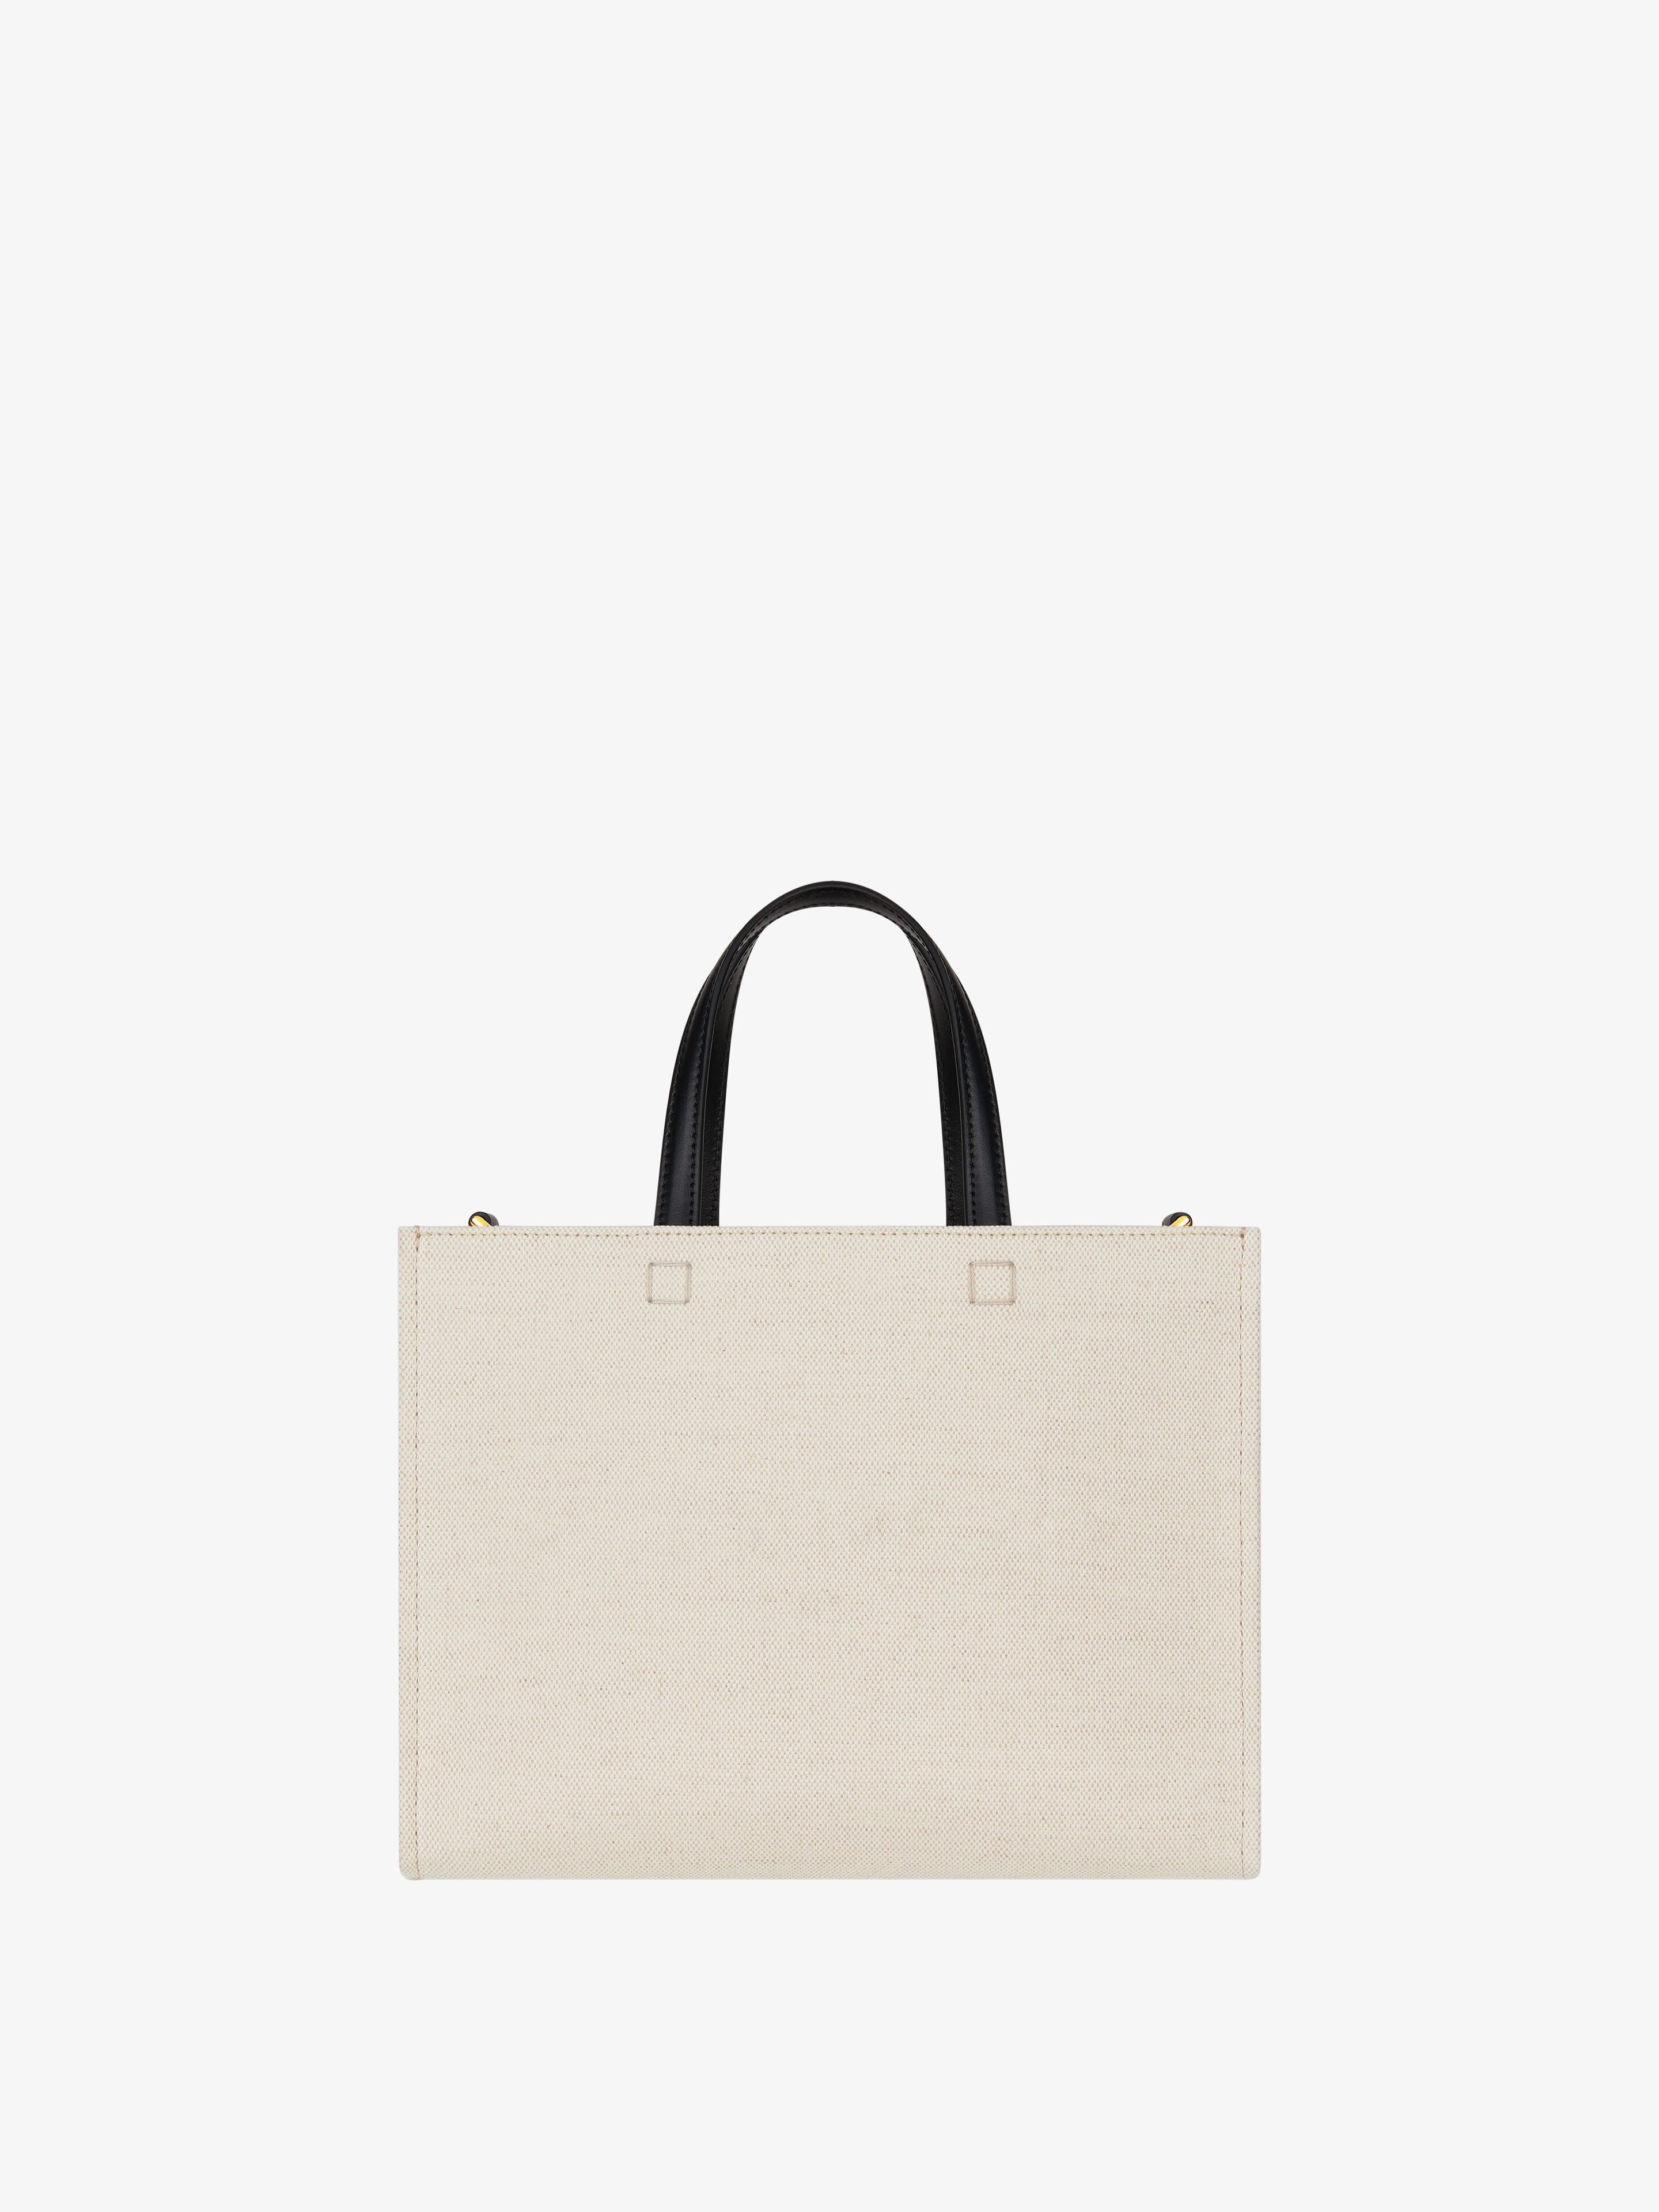 SMALL G-TOTE SHOPPING BAG IN CANVAS - 4